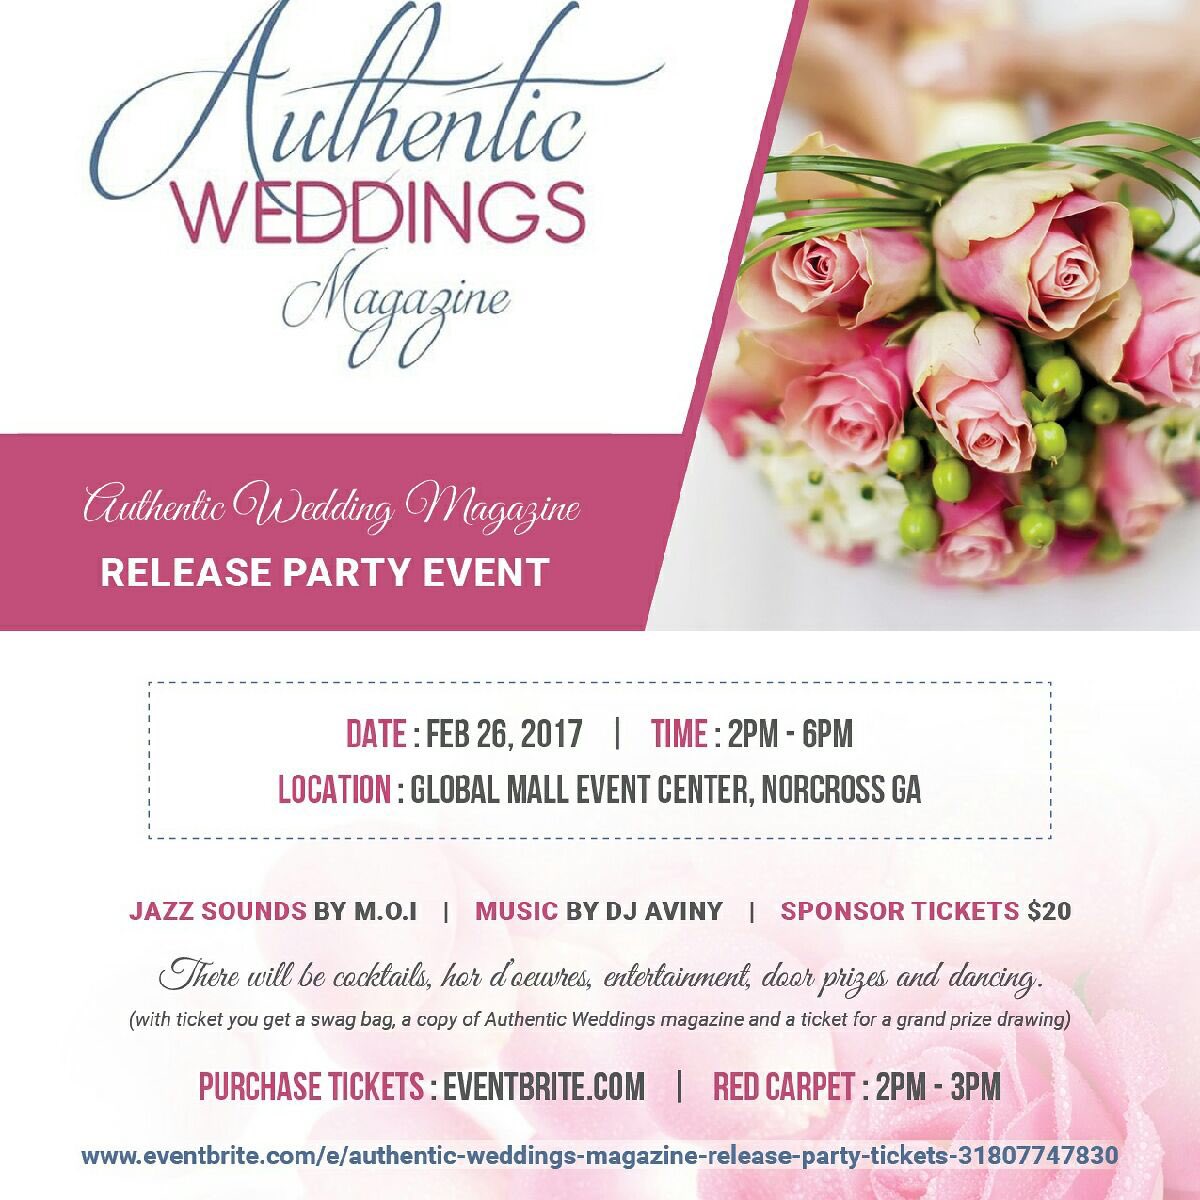 Come on down and support our first issue during our release #party! All are welcomed! #NorcrossGeorgia #weddings #magazine #weddingmagazine